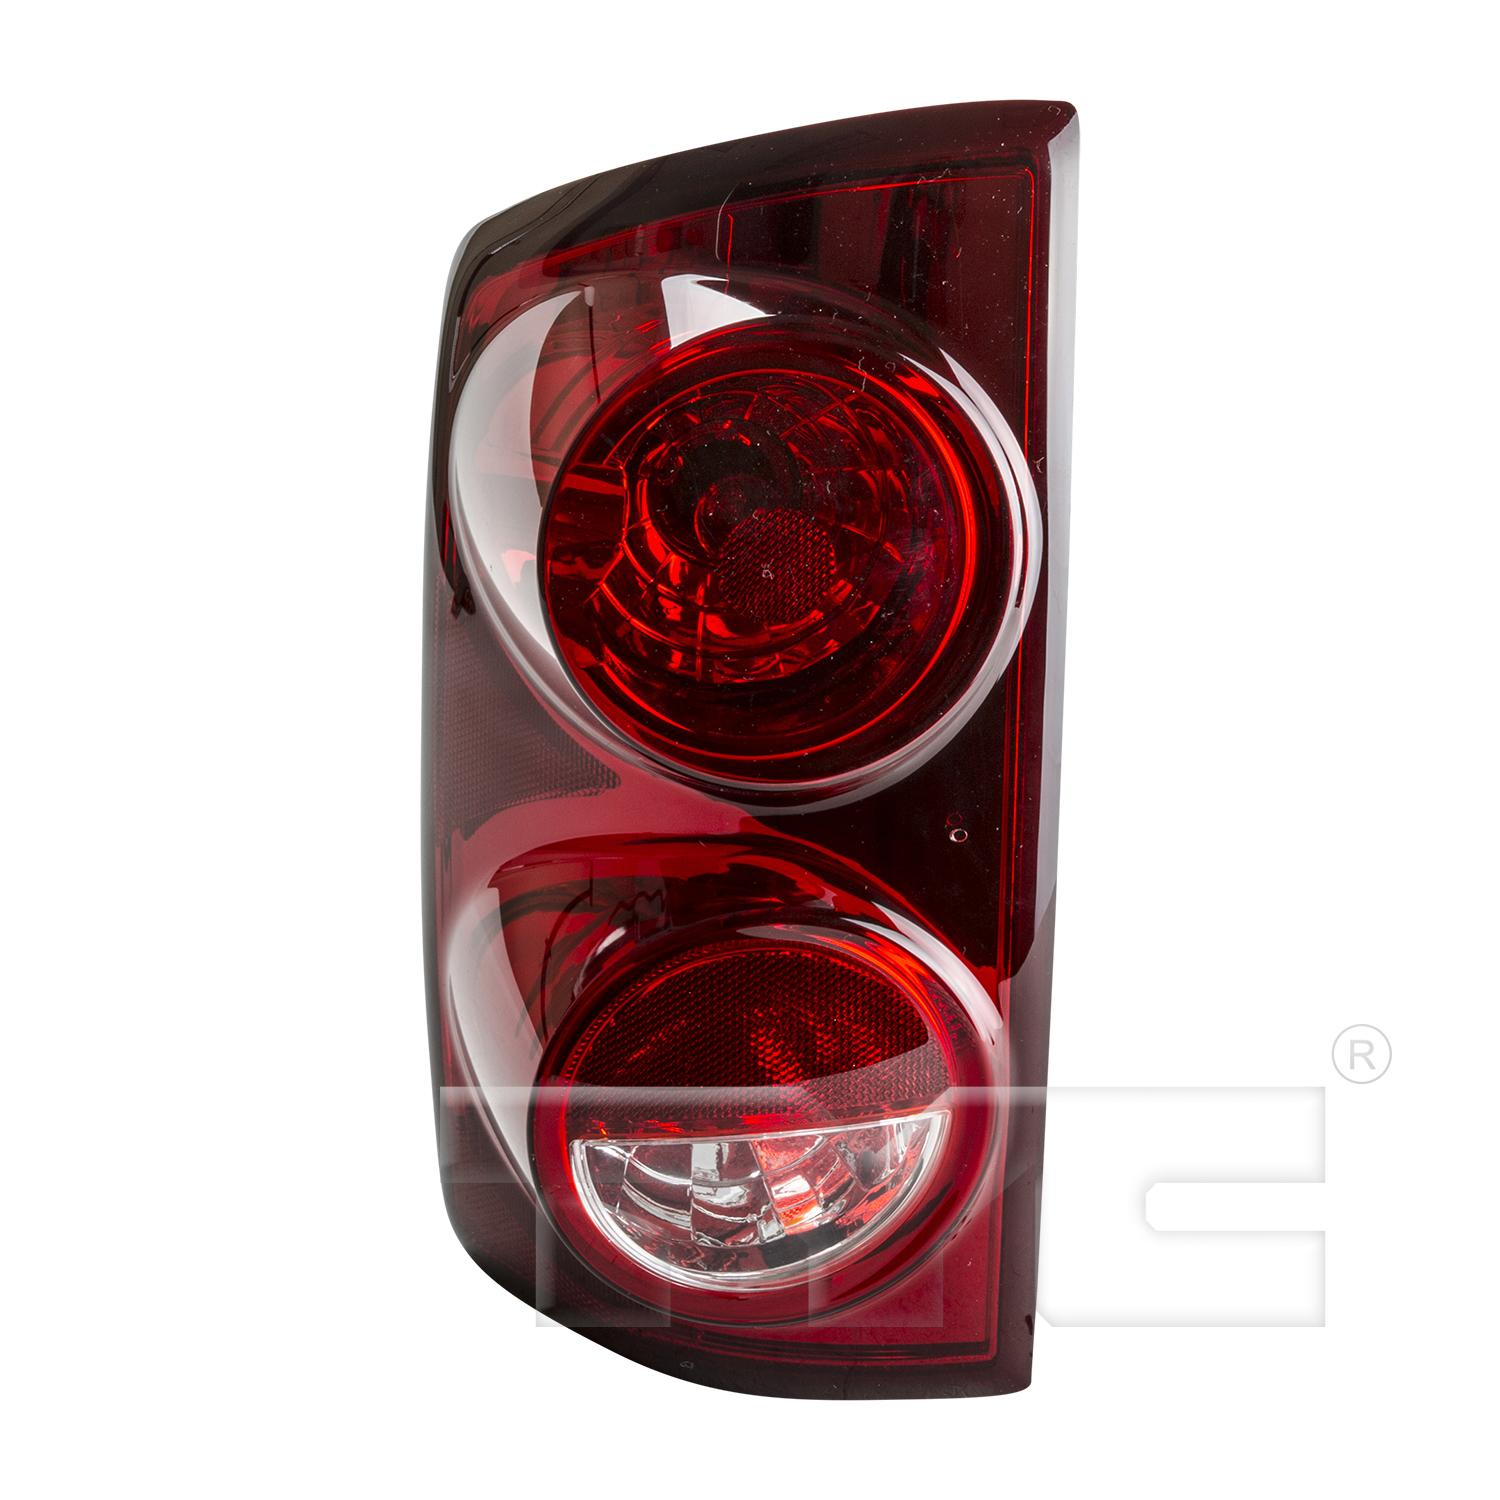 Aftermarket TAILLIGHTS for DODGE - RAM 2500, RAM 2500,07-08,LT Taillamp assy